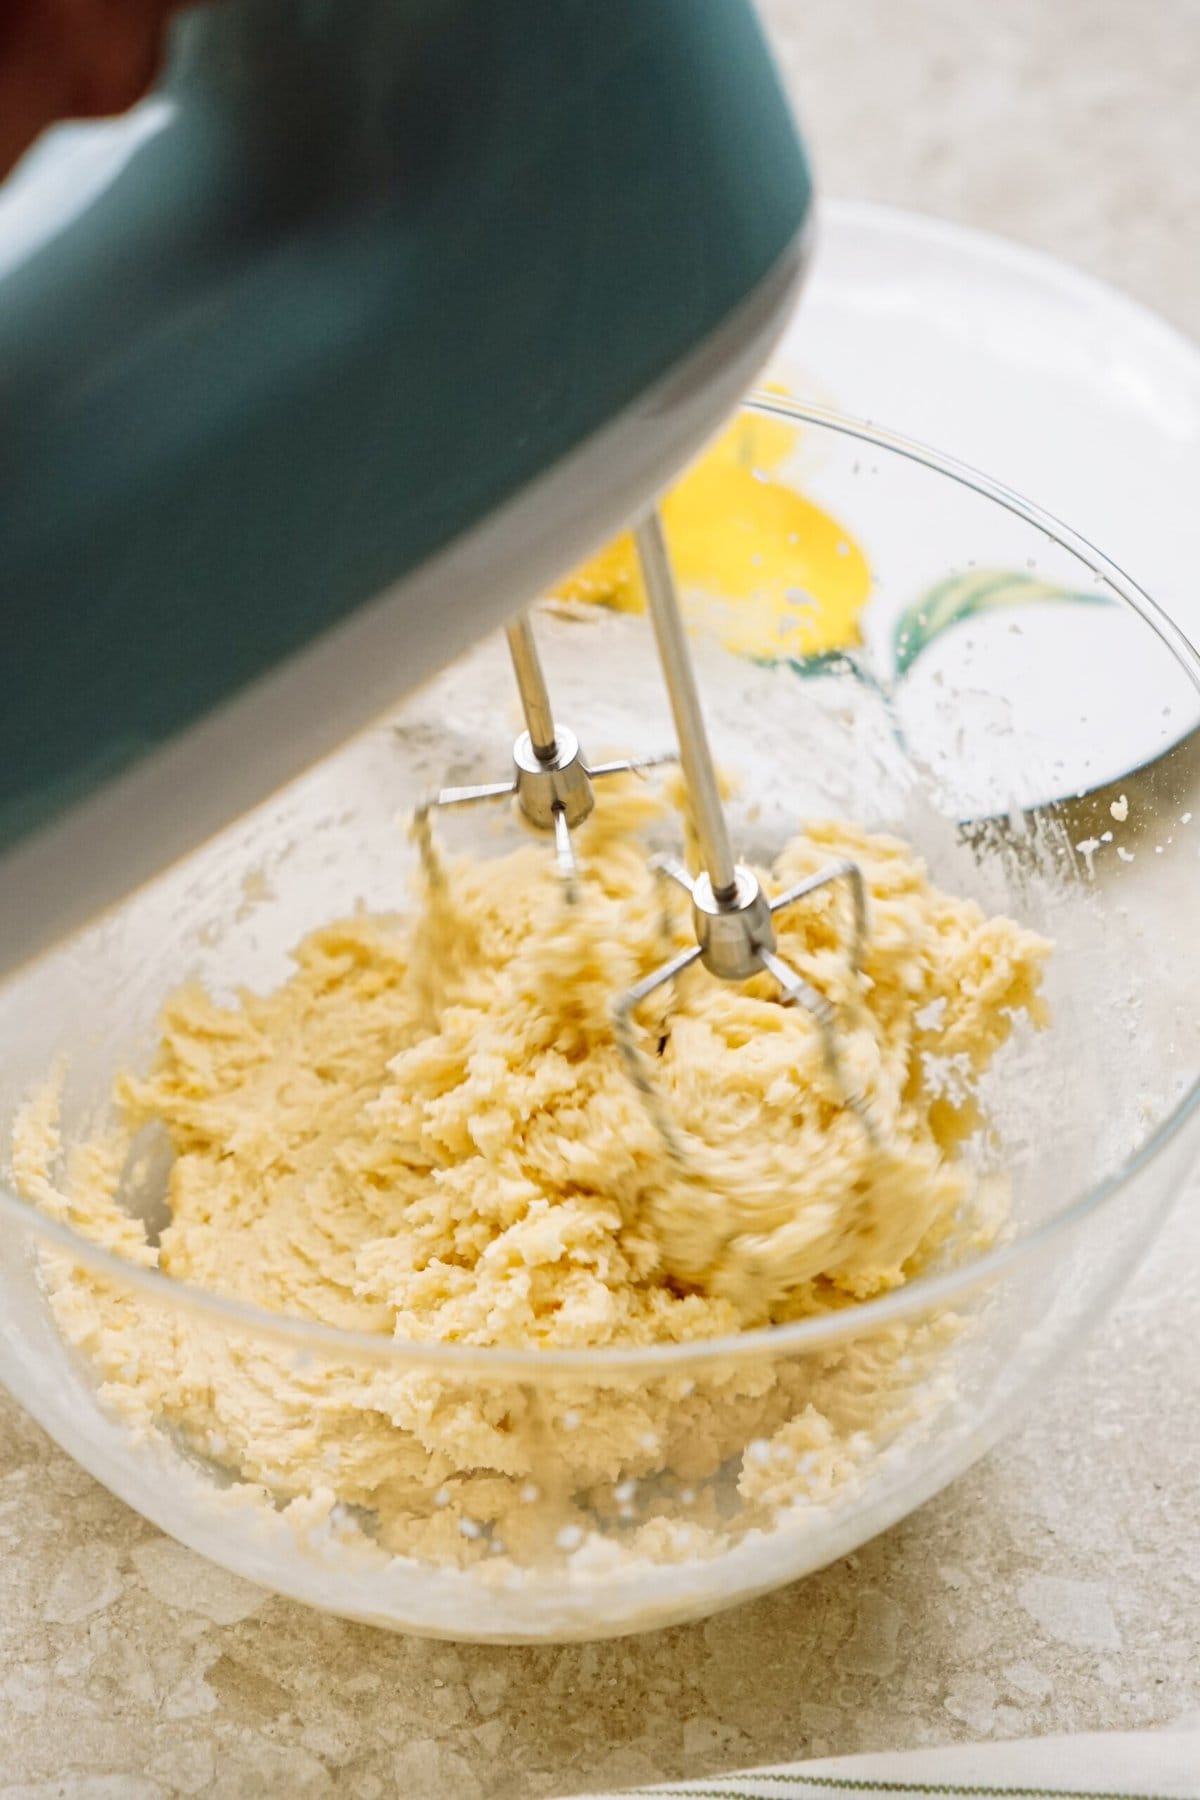 Electric mixer beating eggs and flour in a glass bowl for baking preparation.